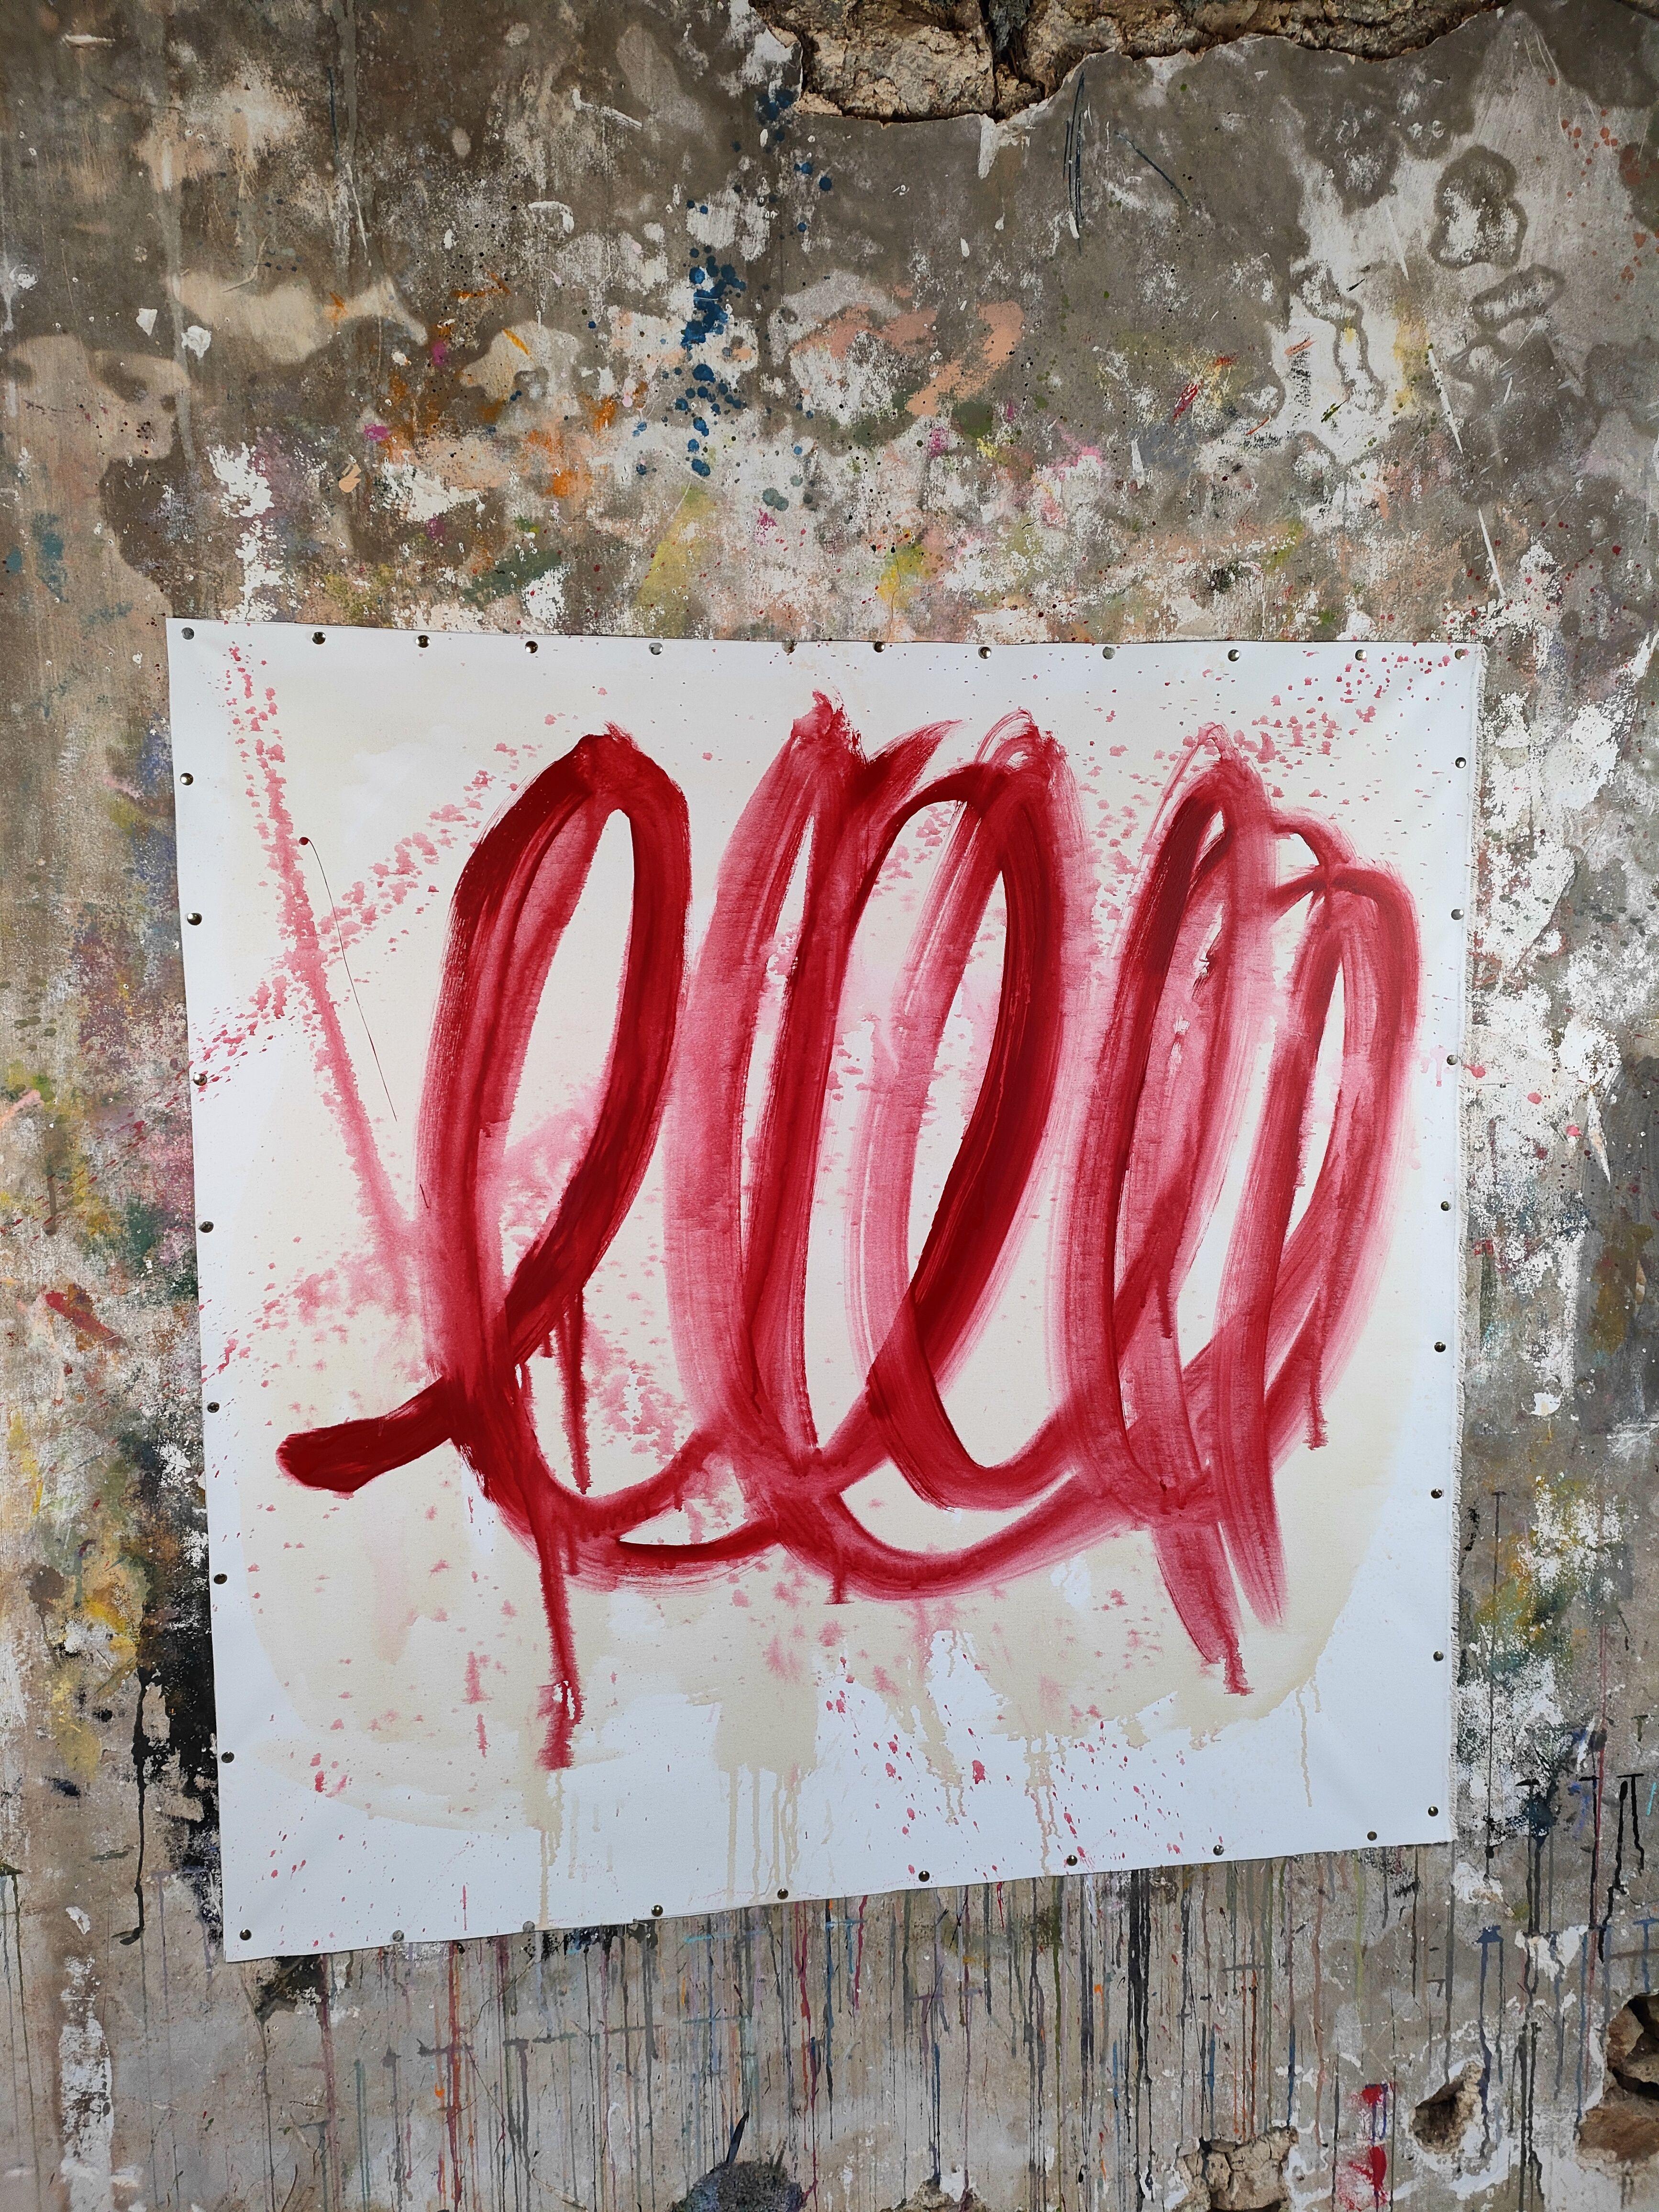 Mood variations is an abstract expressionism artwork is inspired by Cy Twombly works.  Red gestural on light background.  :: Painting :: Abstract Expressionism :: This piece comes with an official certificate of authenticity signed by the artist ::